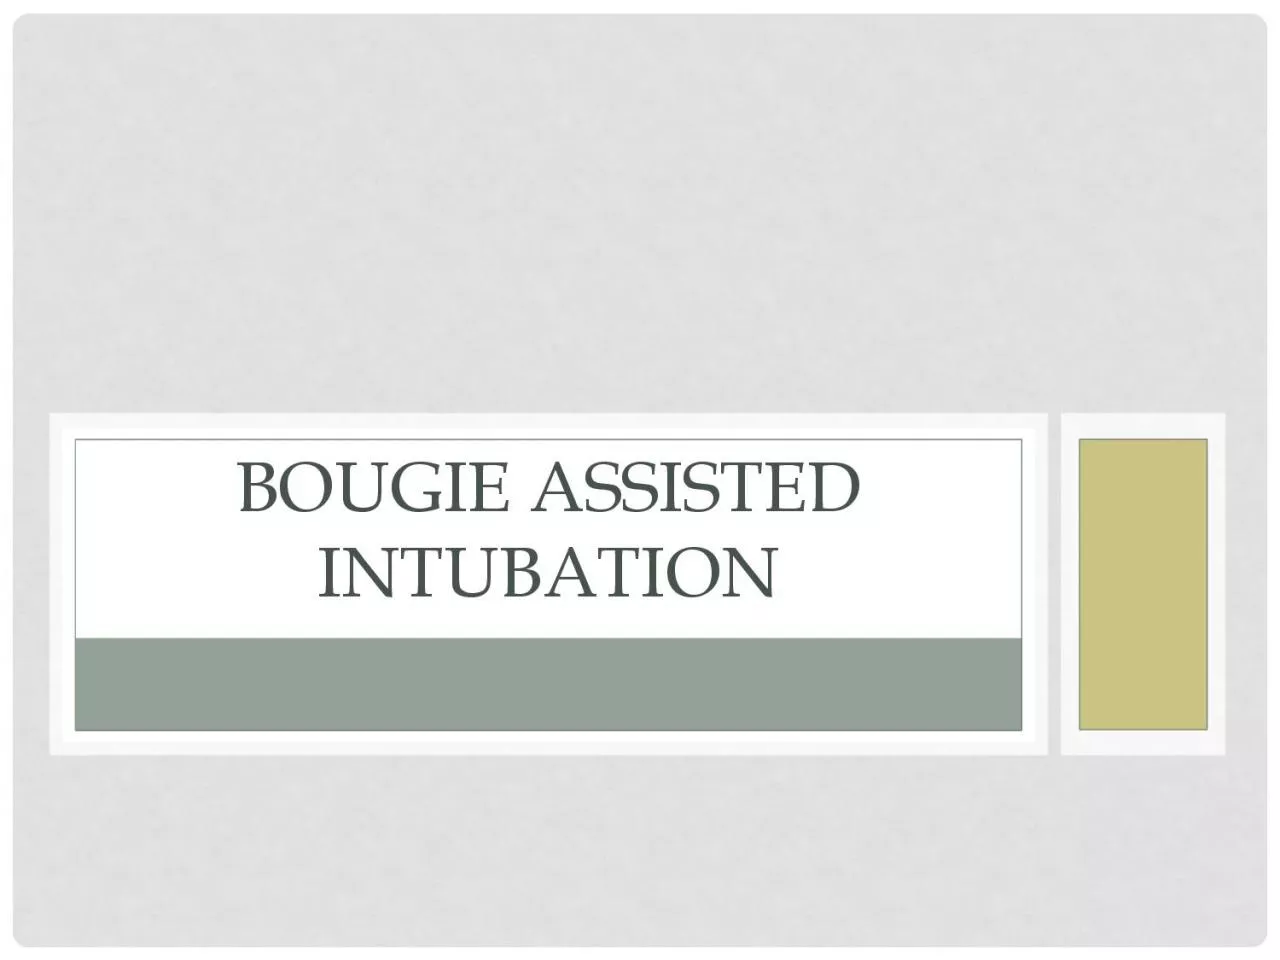 BOUGIE ASSISTED